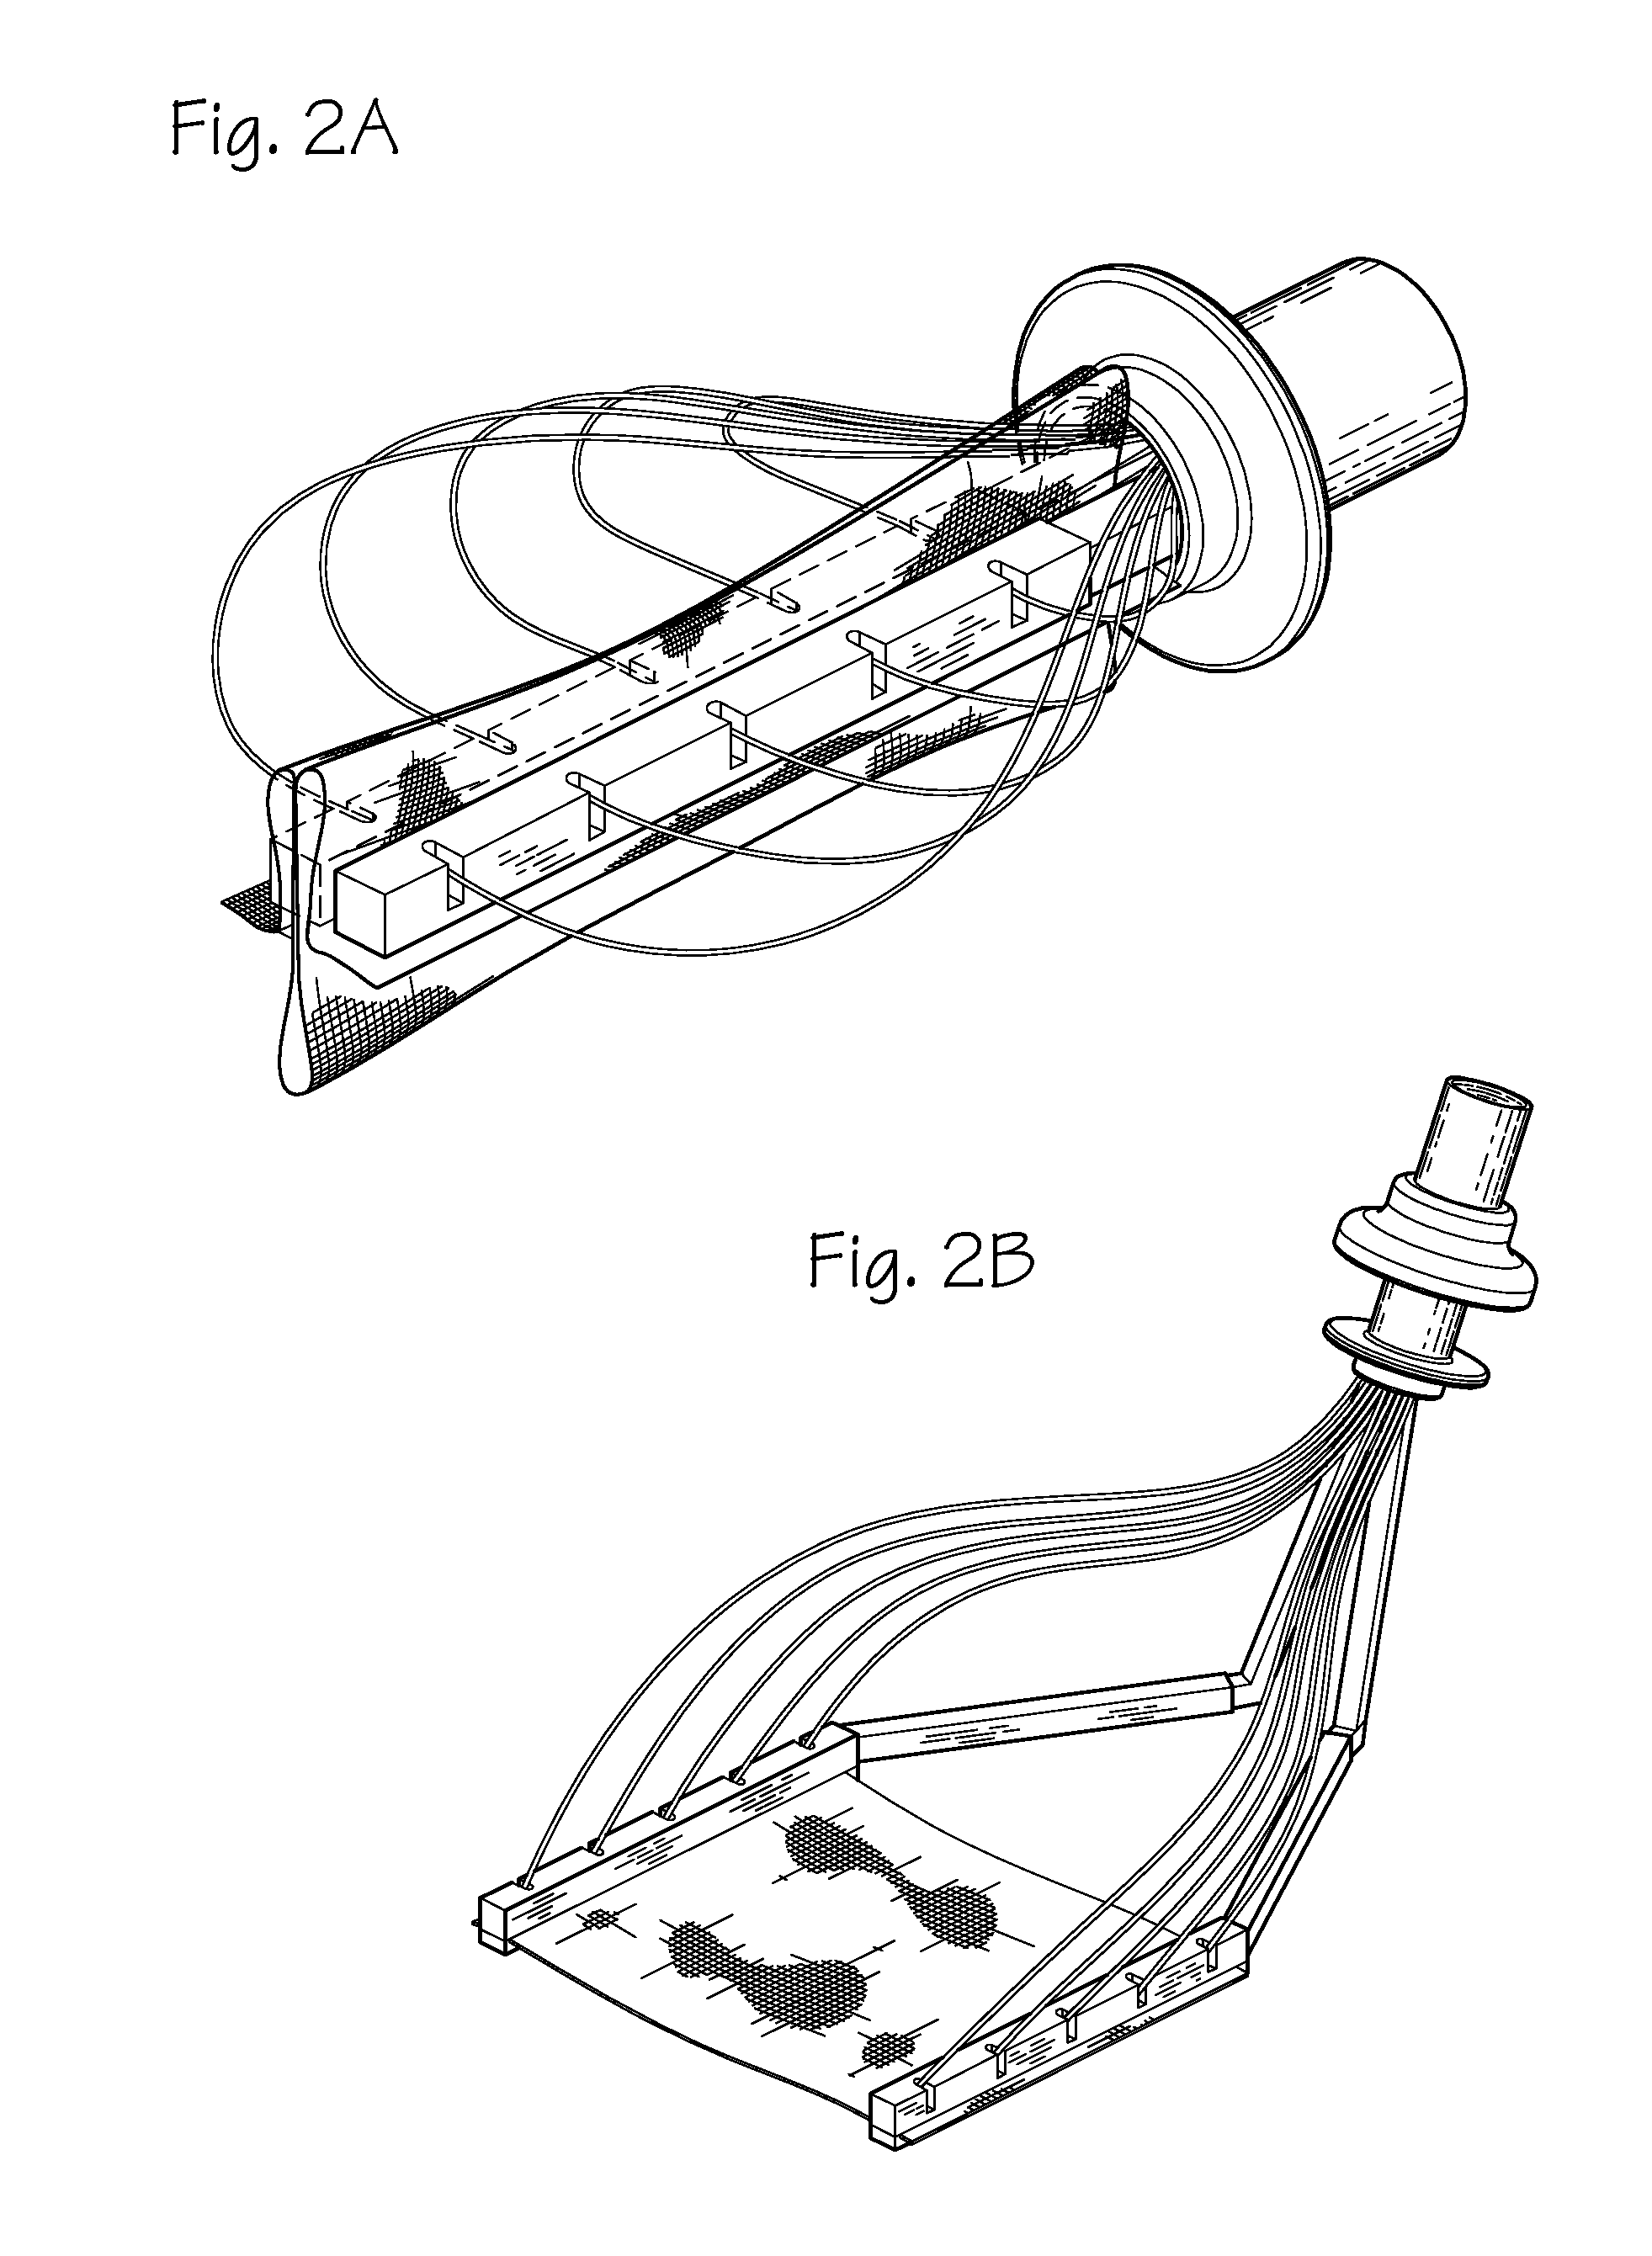 Method and Devices for Implantation of Biologic Constructs